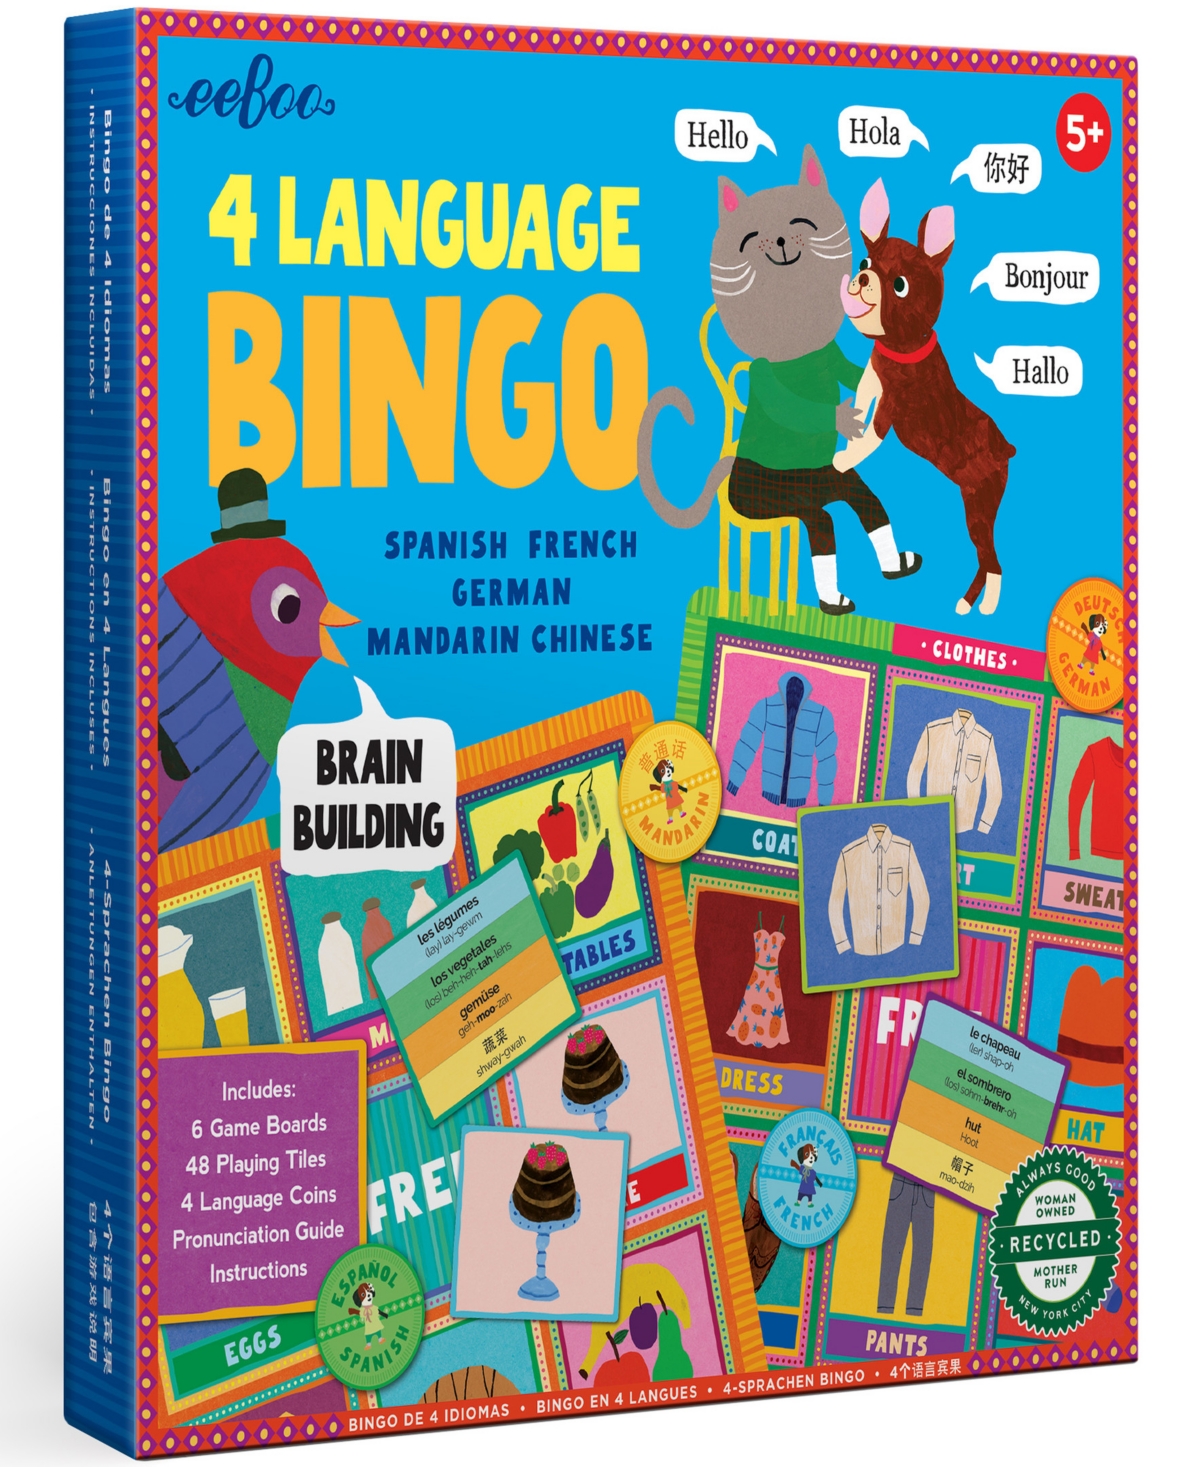 Eeboo 4 Language Bingo Game And Spanish, French, German, Mandarin Chinese, Ages 3 And Up In Multi